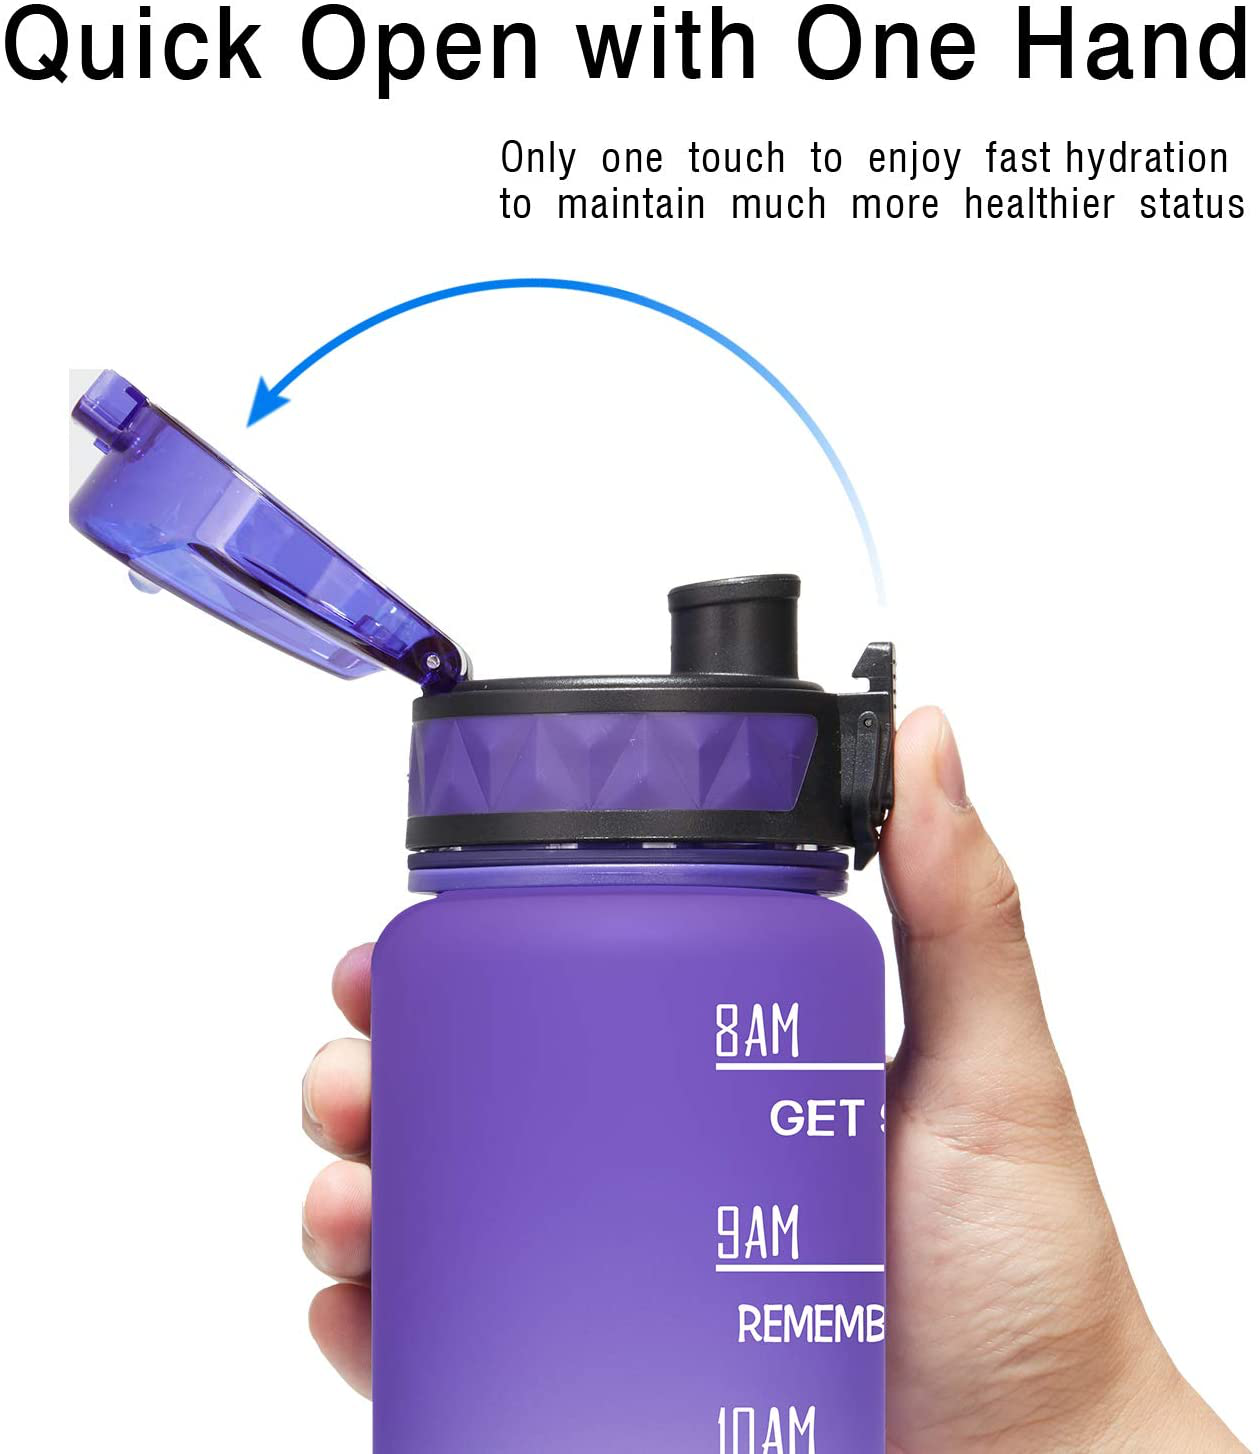 Elvira 32oz Motivational Fitness Sports Water Bottle with Time Marker & Removable Strainer,Fast Flow,Flip Top Leakproof Durable BPA Free Non-Toxic